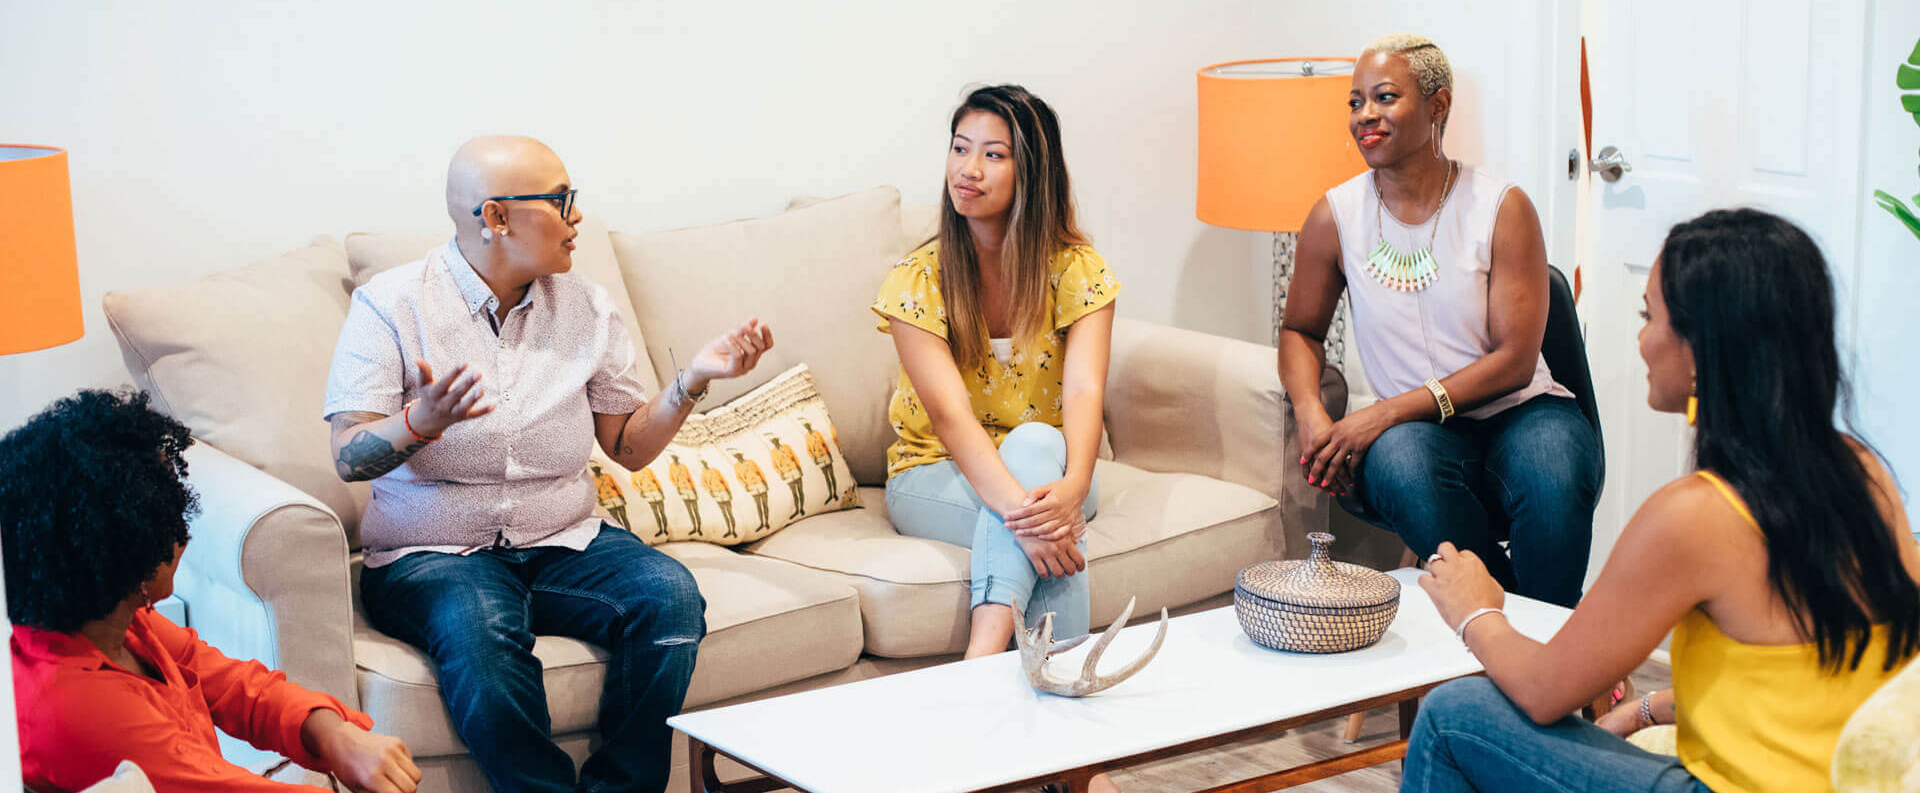 Group of adults engaged in a casual conversation in a Sherman Oaks living room setting.